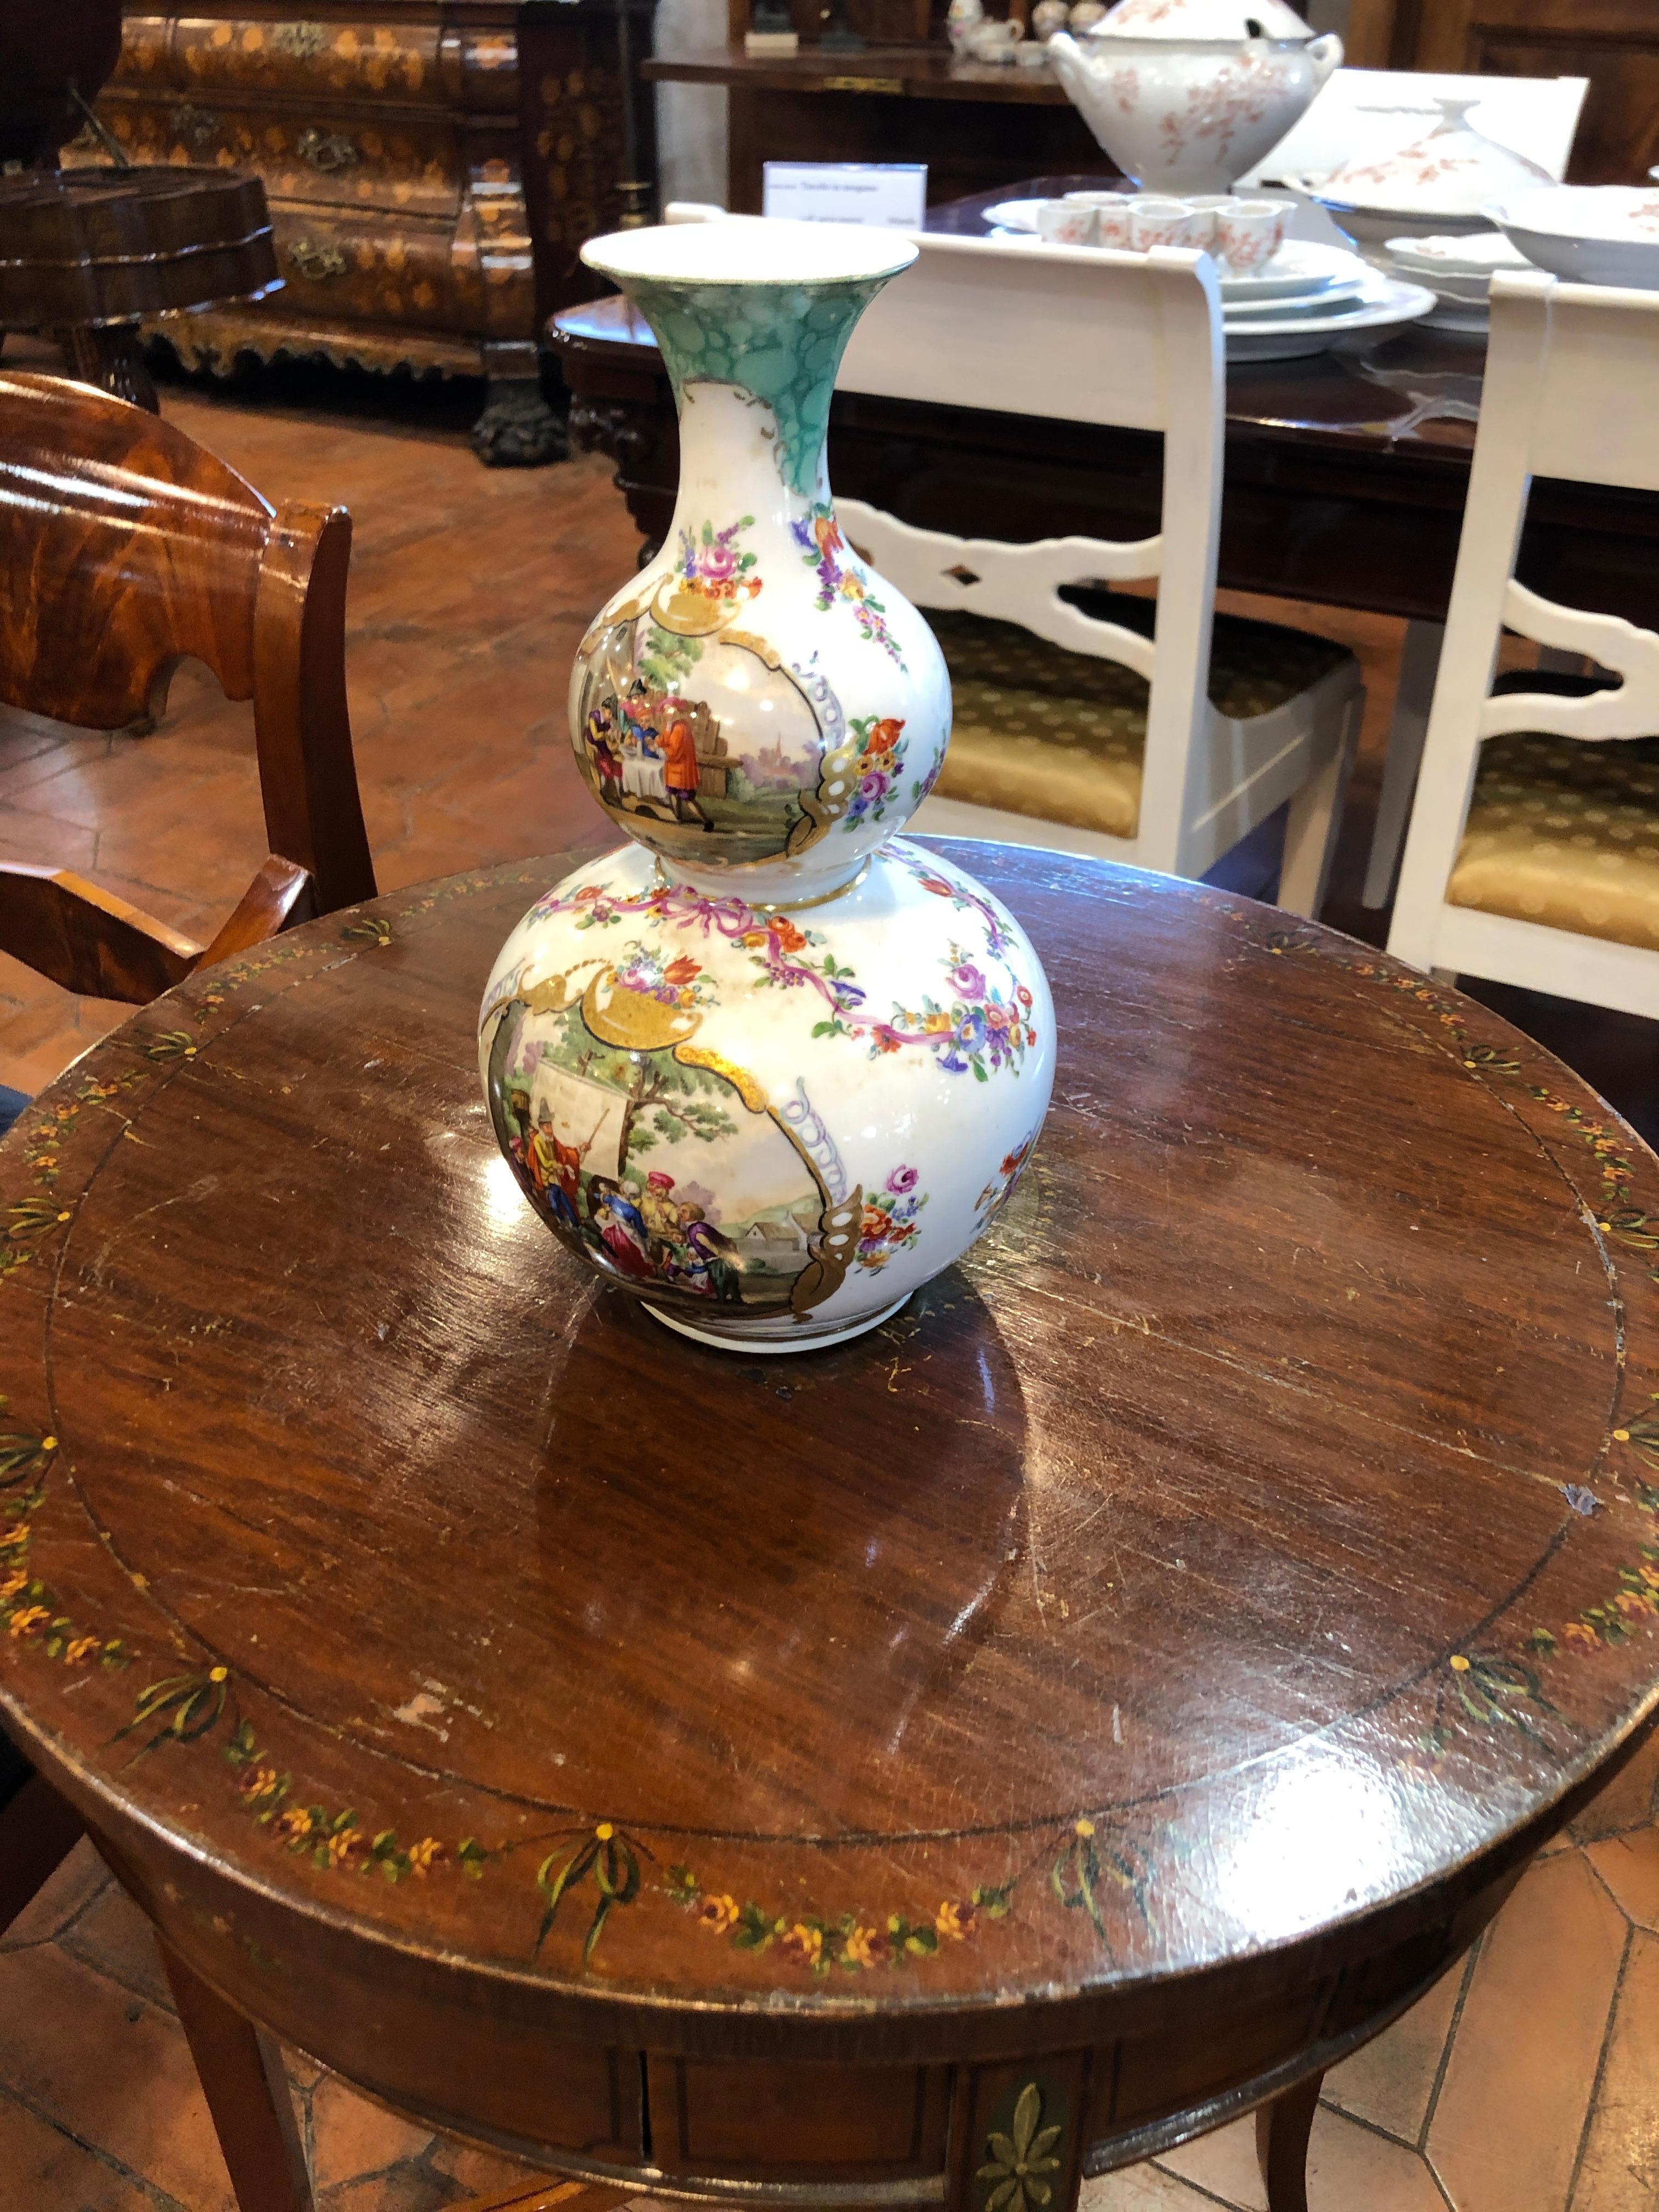 Beautiful German porcelain vase, stamped AR, Augustus Rex (Meissen), hand painted with scenes of daily life on one side, the other side is embellished with figures with floral motifs. The vase is in excellent condition and does not carry porcelain